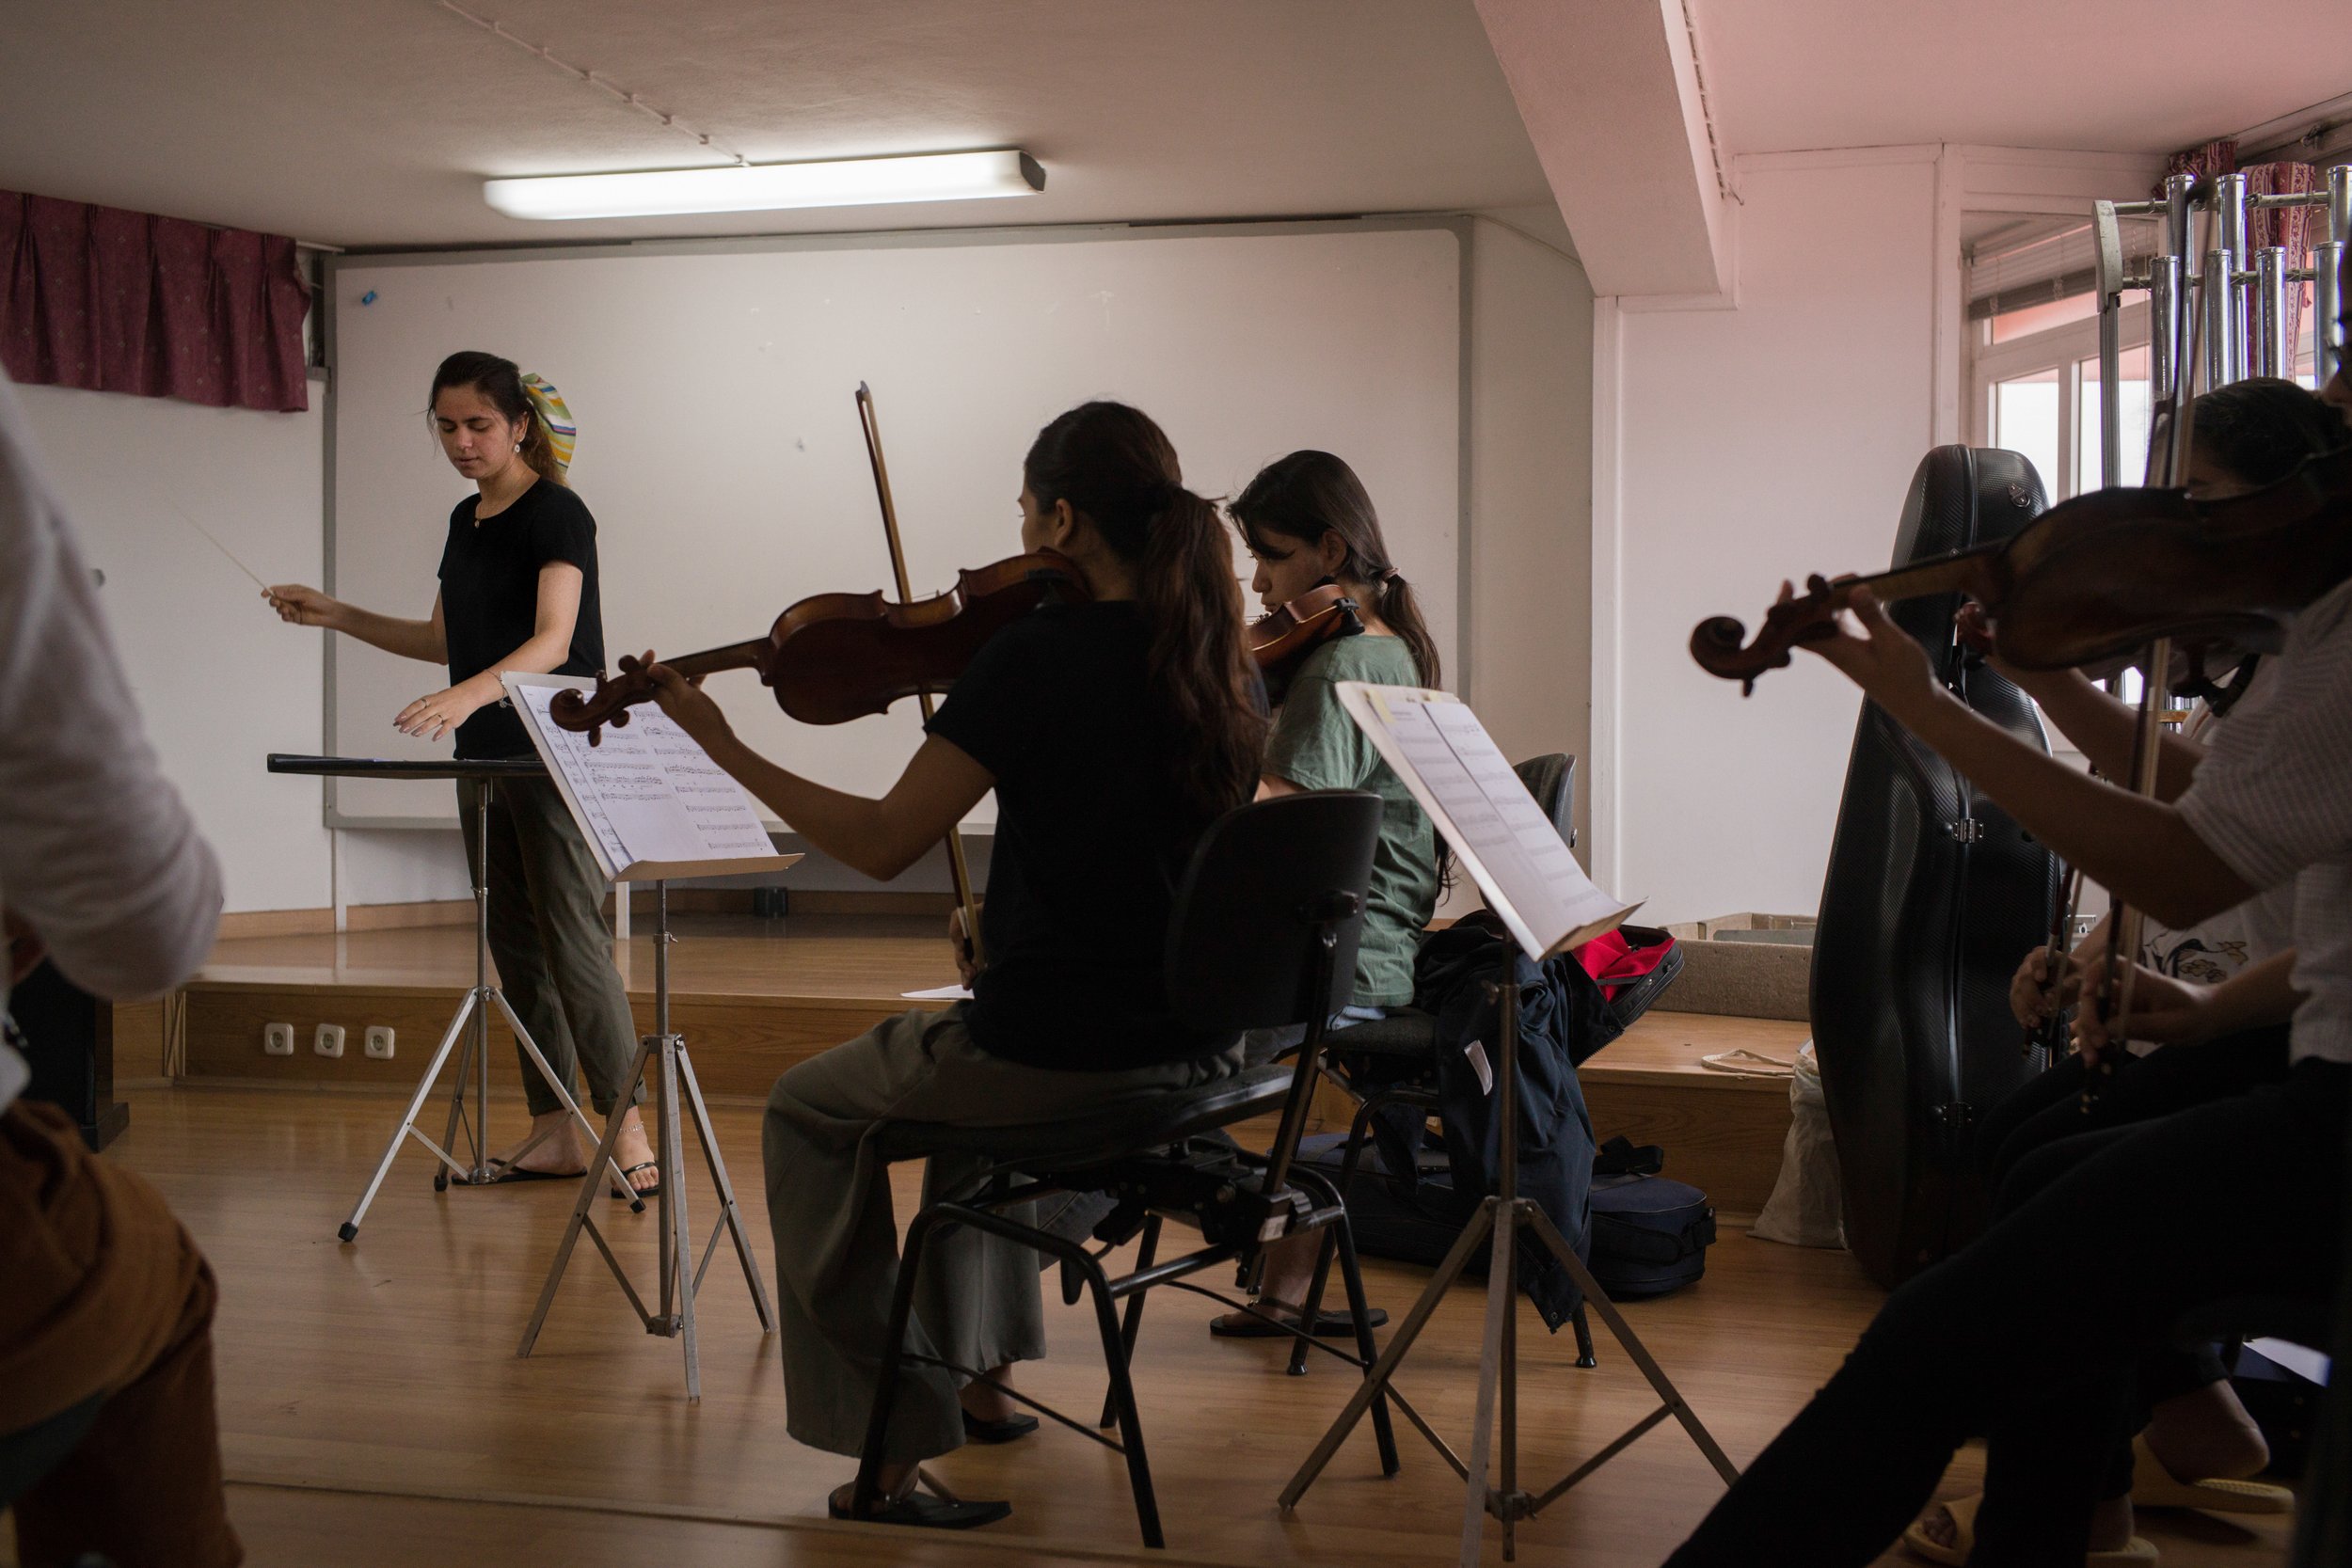  Shogufa Safi, conducts the few girls that are still left in the all female Zhora Orchestra on the 7th floor of the former military Hospital of Ajuda, Lisbon, Portugal. An estimated 150 students have fled to Germany due to the poor conditions of the 